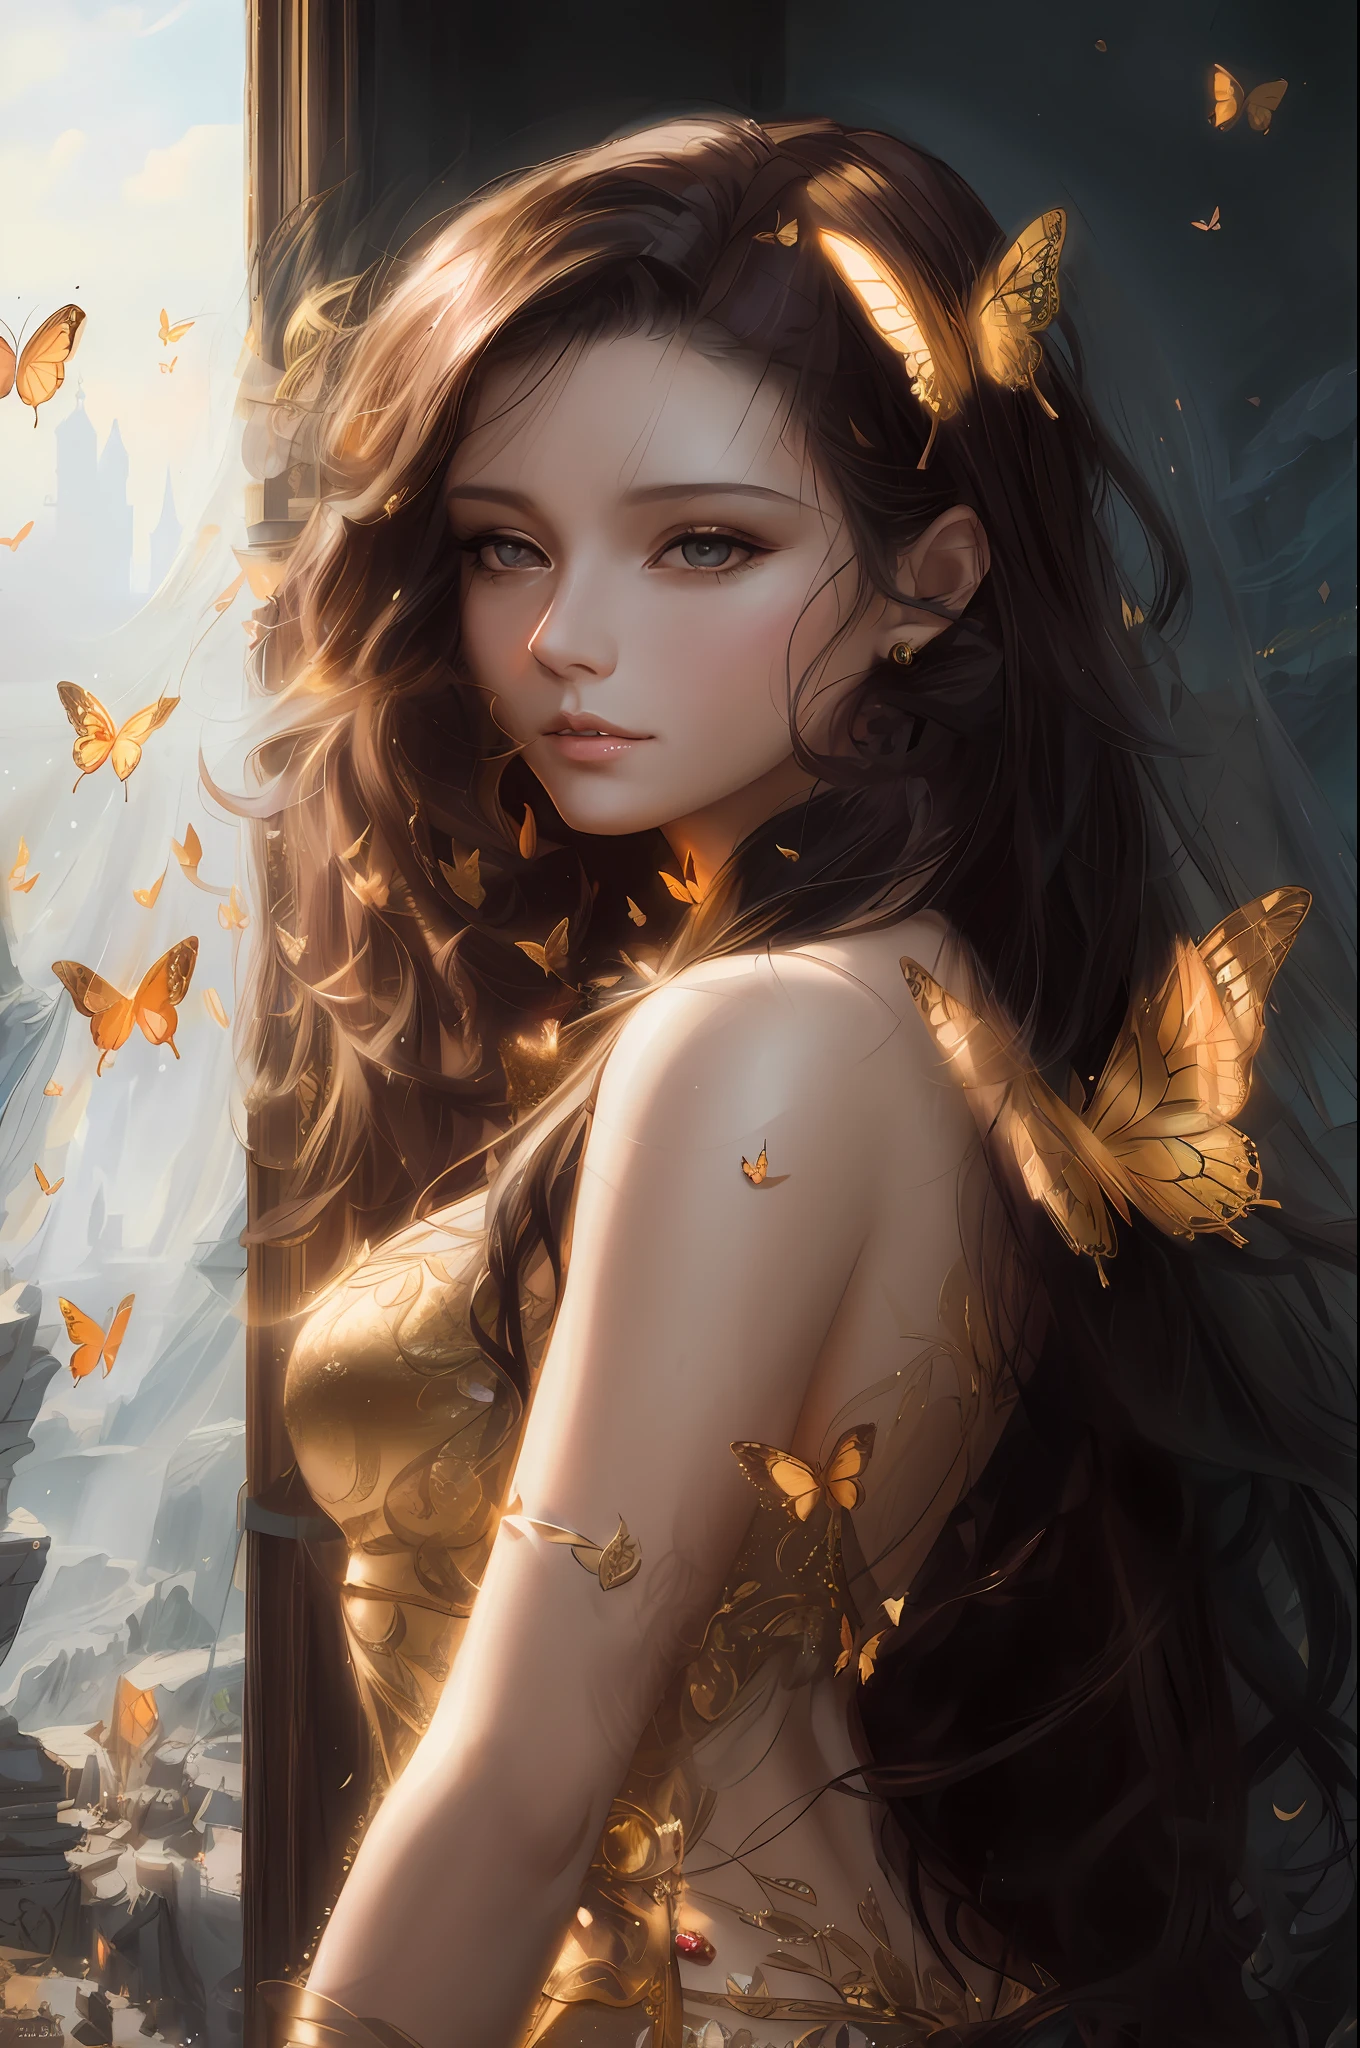 arafed woman with long hair and butterfly wings in a gold dress, beautiful fantasy art, beautiful fantasy art portrait, neoartcore and charlie bowater, beautiful fantasy portrait, very beautiful fantasy art, beautiful digital artwork, fantasy art behance, realistic fantasy illustration, charlie bowater art style, fantasy art style, fantasy art portrait, amazing fantasy art